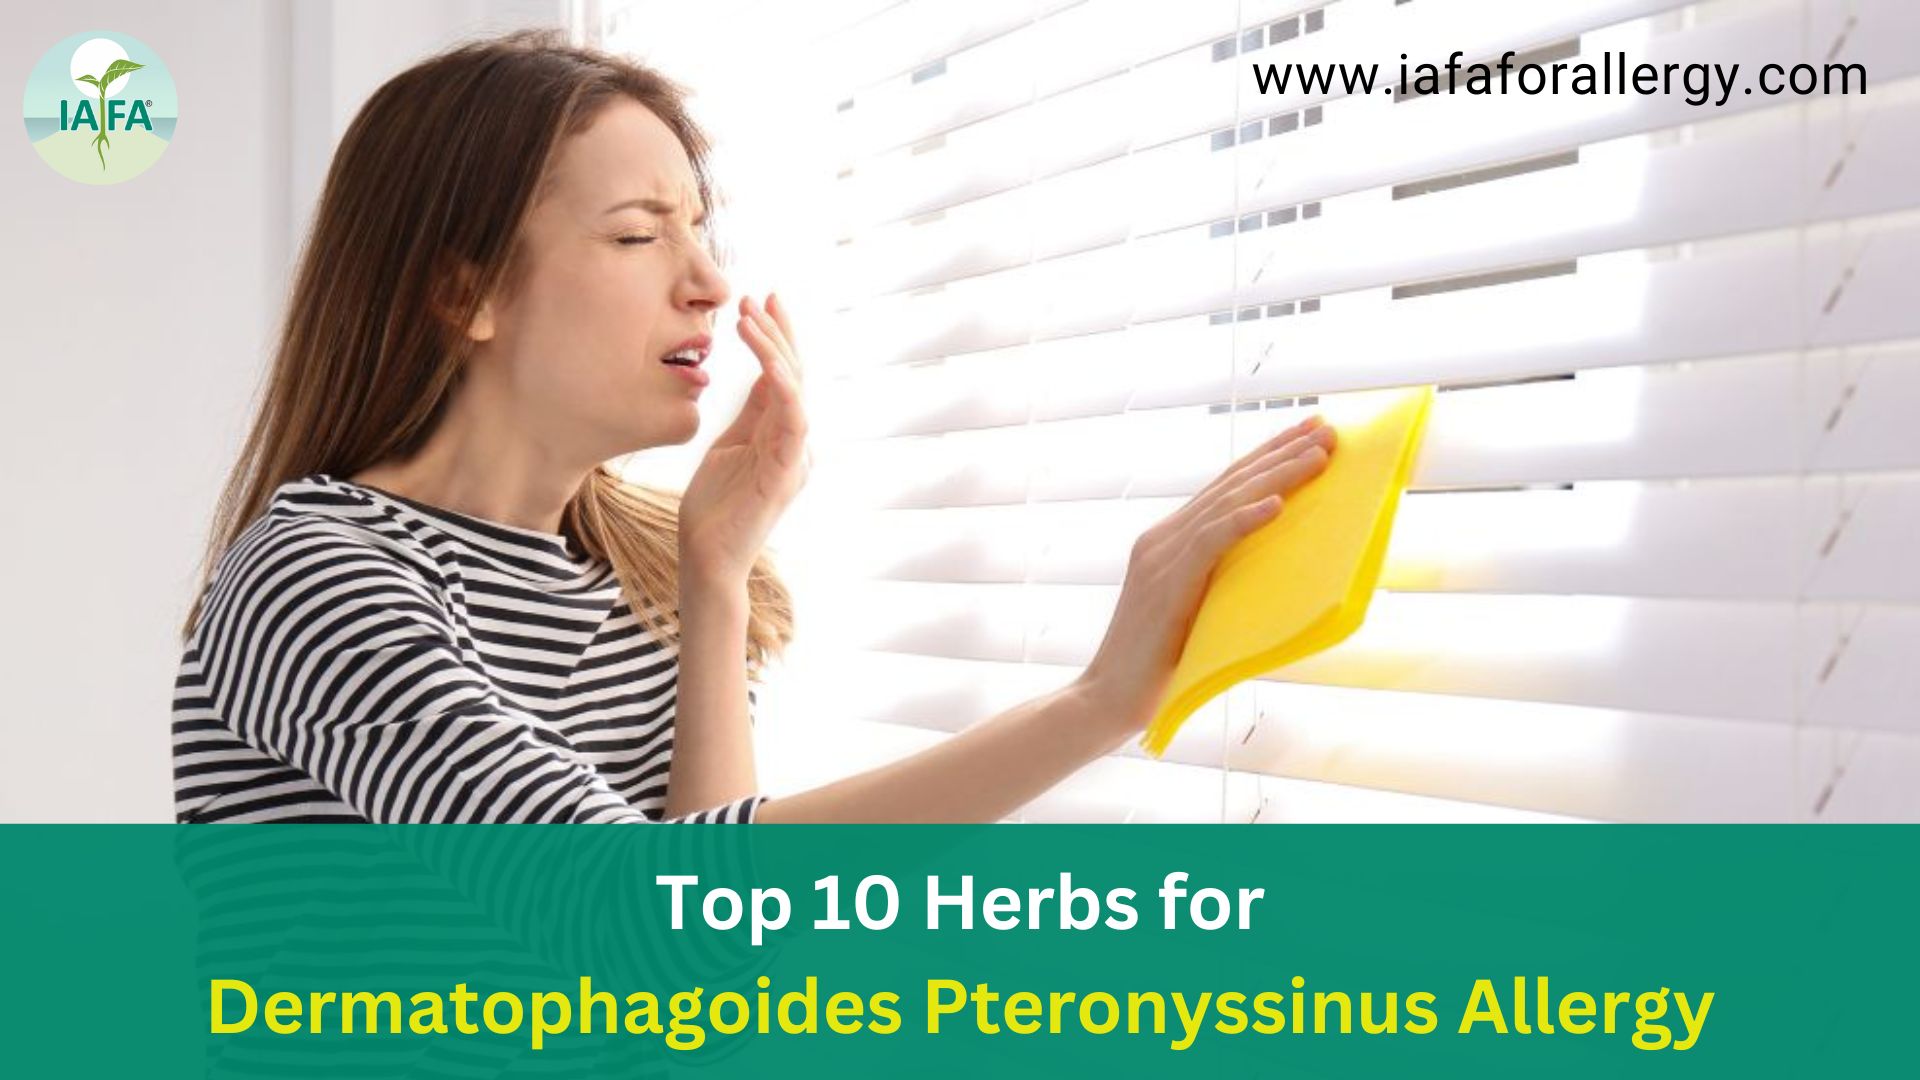 Top 10 Herbs for Dermatophagoides Pteronyssinus Allergy